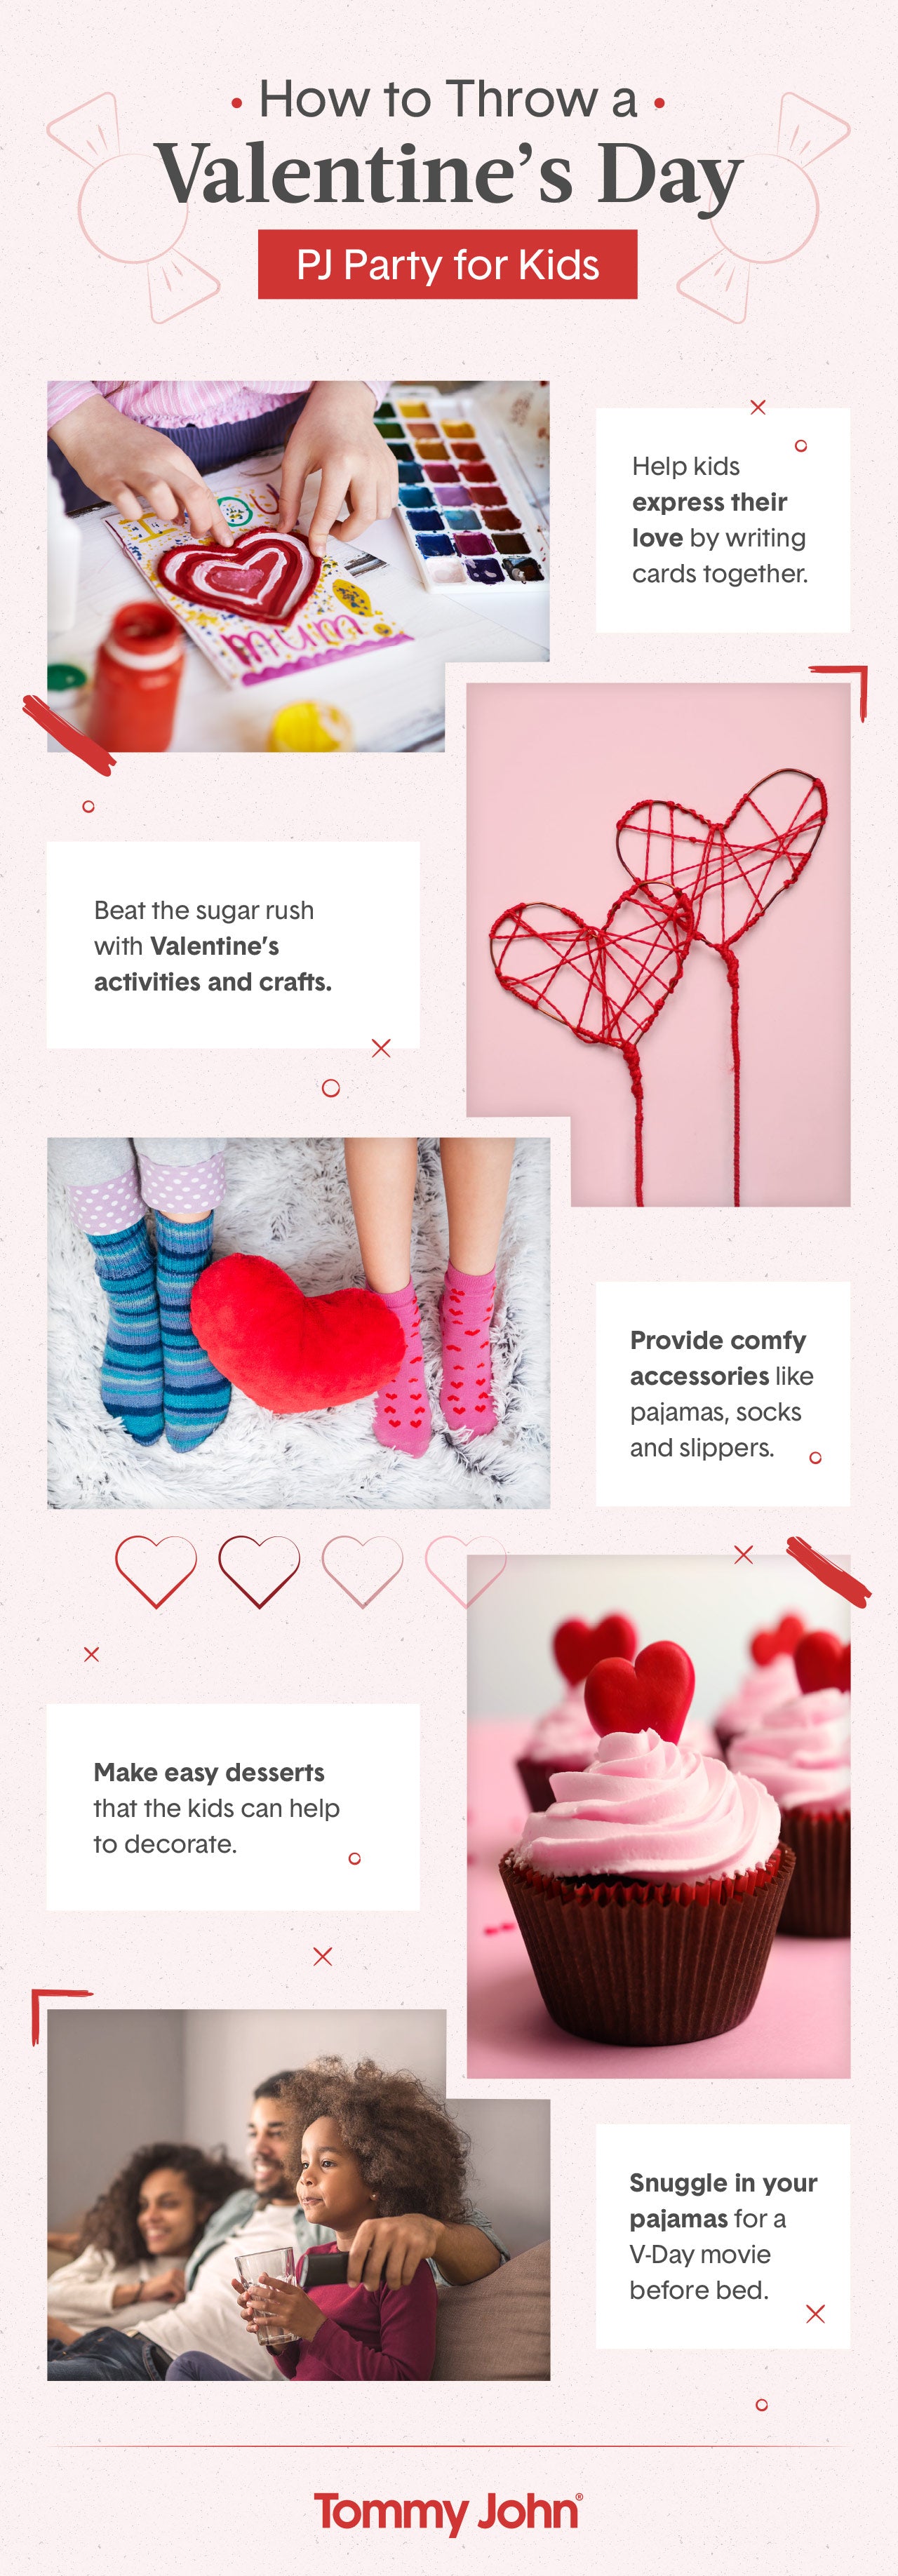 5 Things to do on Valentines Day! – Tahoma News